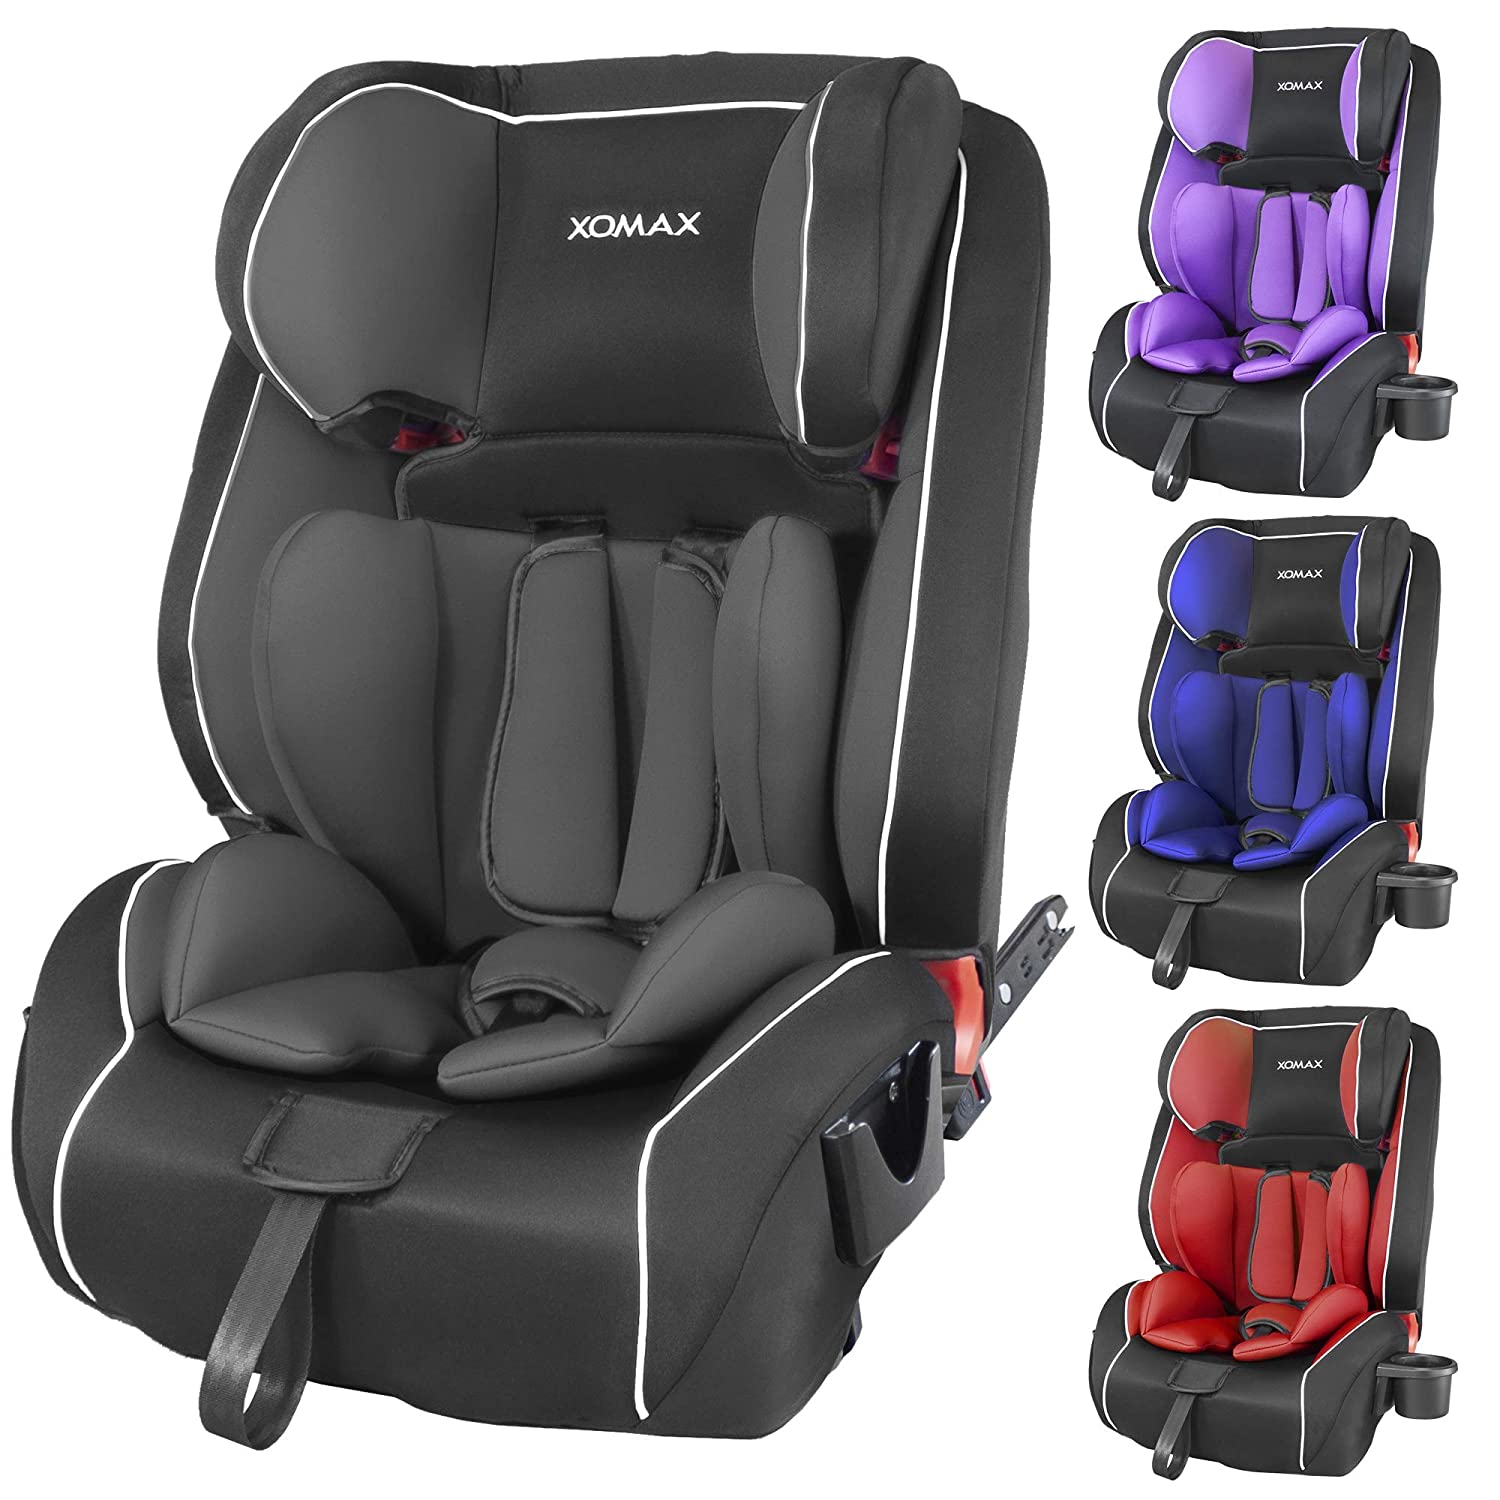 Xomax HQ668 Isofix Child Car Seat, 9 - 36 kg with Bottle Holder, Grows with Your Child: 1 - 12 Years, Group 1 / 2 / 3, 5-Point Harness and 3-Point Harness, Removable and Washable Cover, ECE R44/04 grey